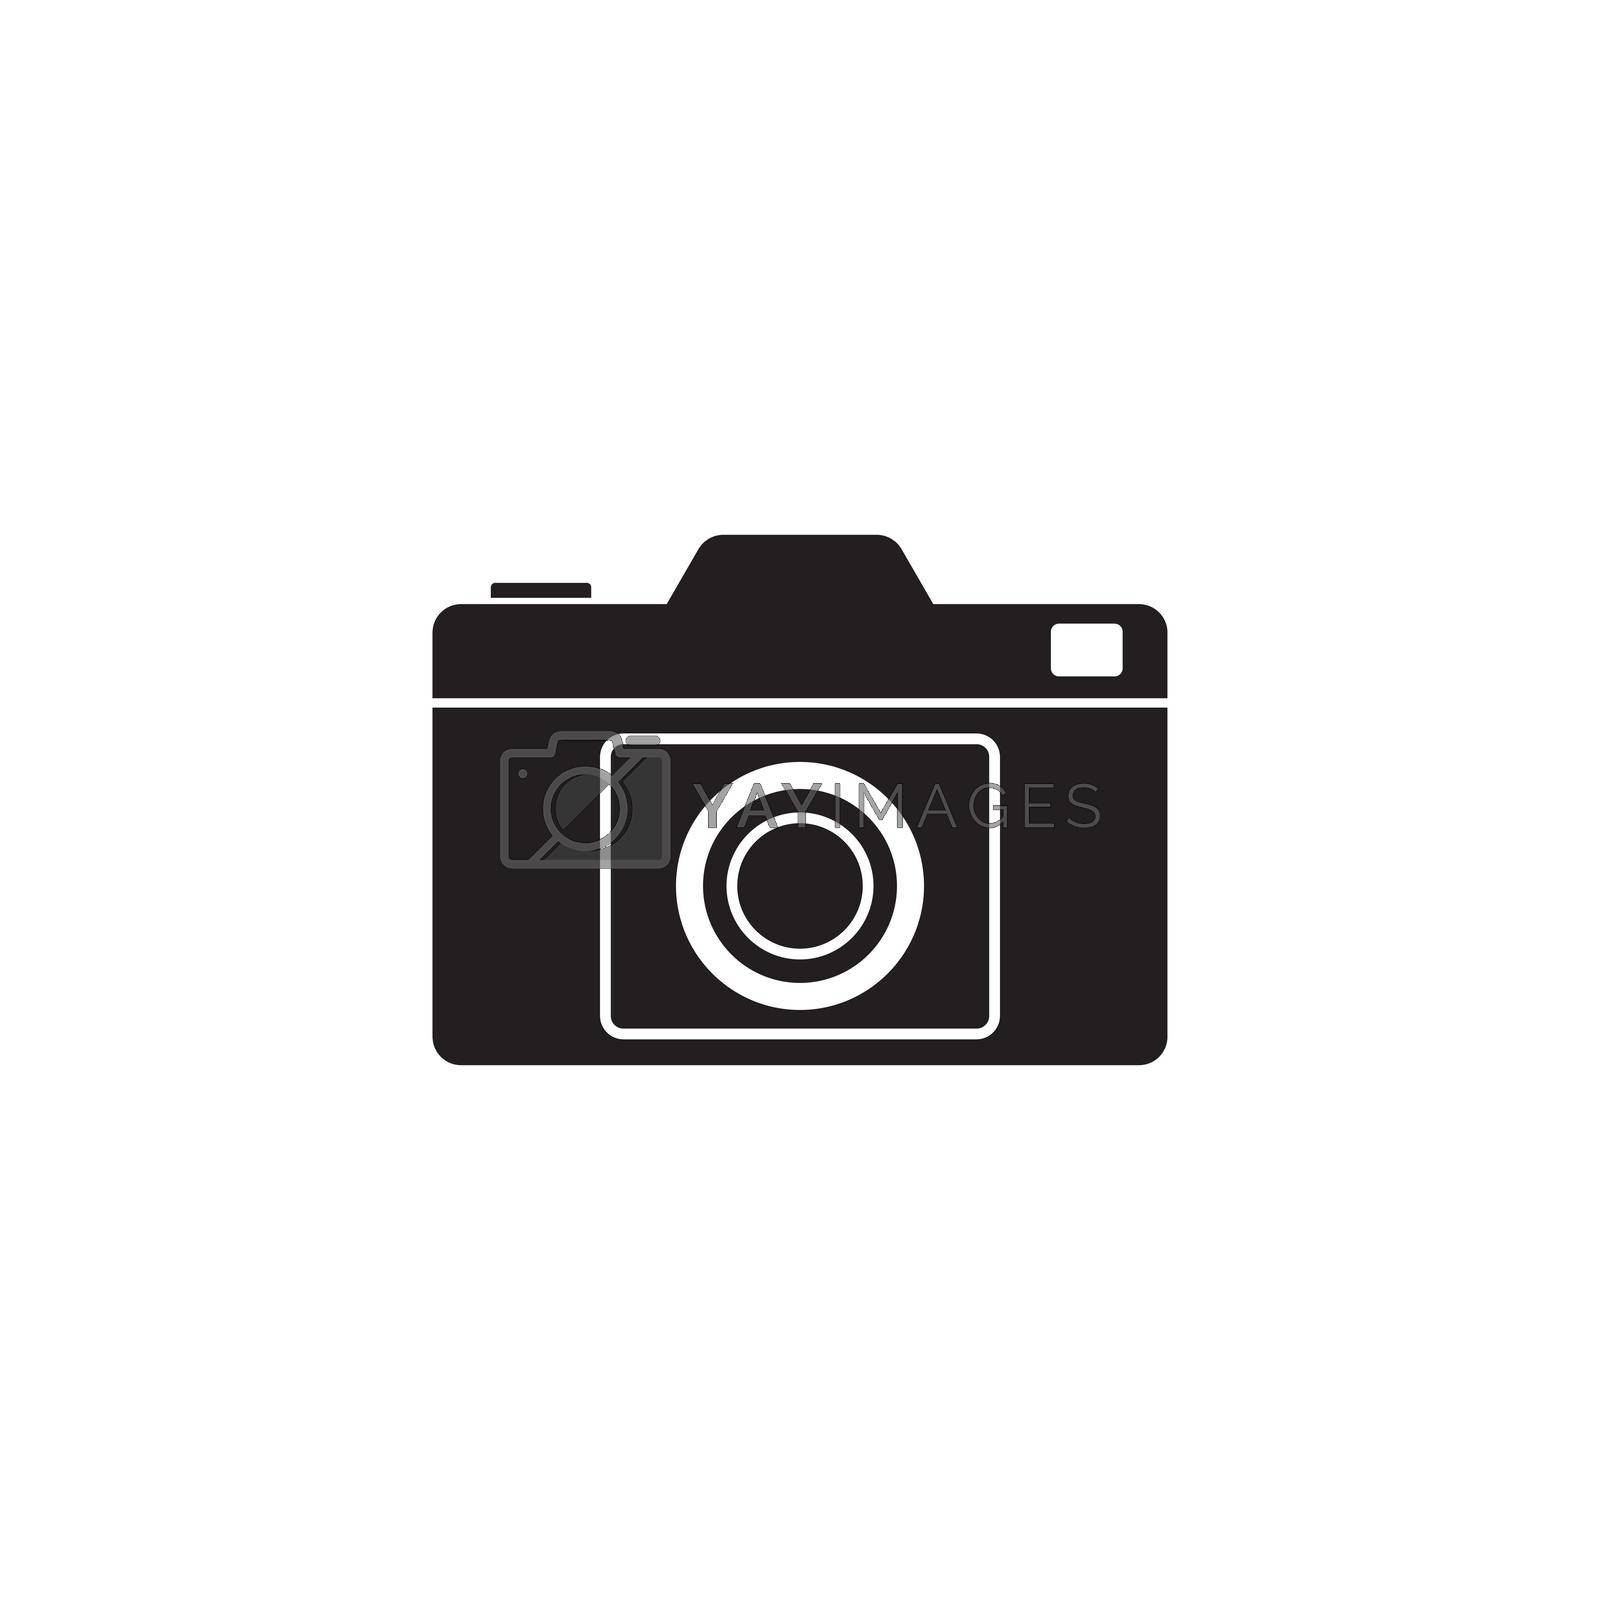 Royalty free image of Camera icon vector by awk